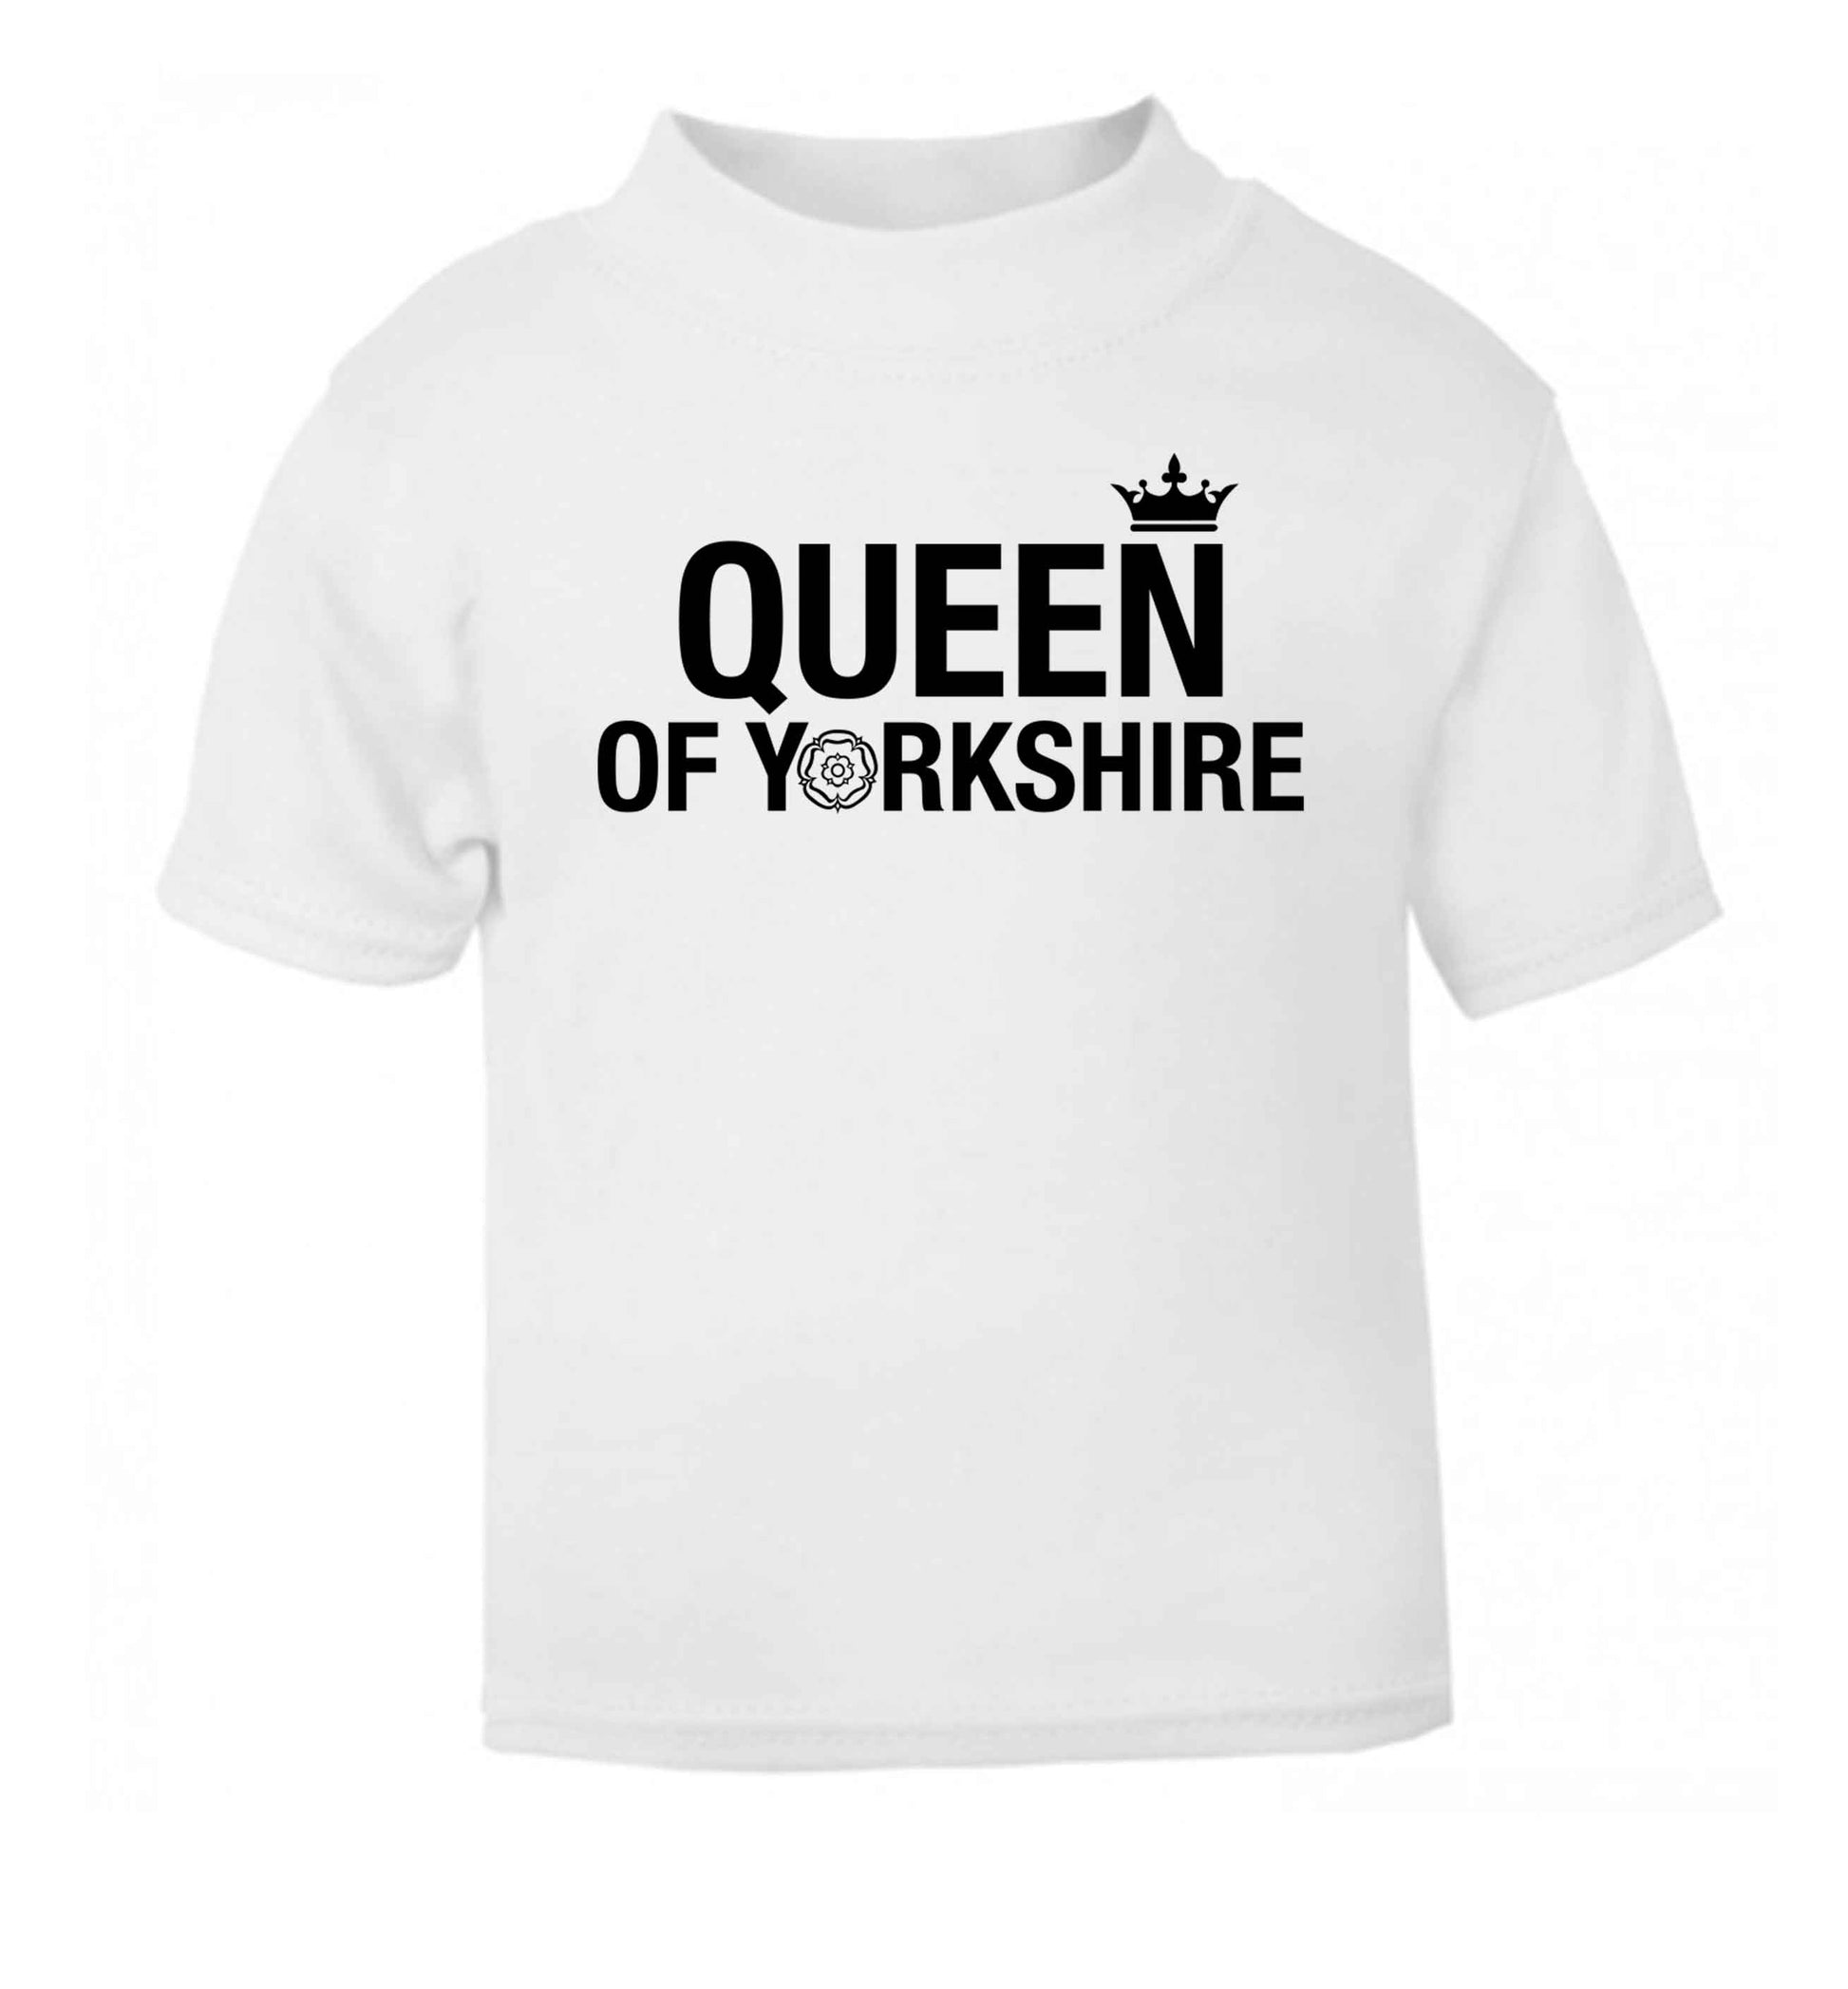 Queen of Yorkshire white Baby Toddler Tshirt 2 Years